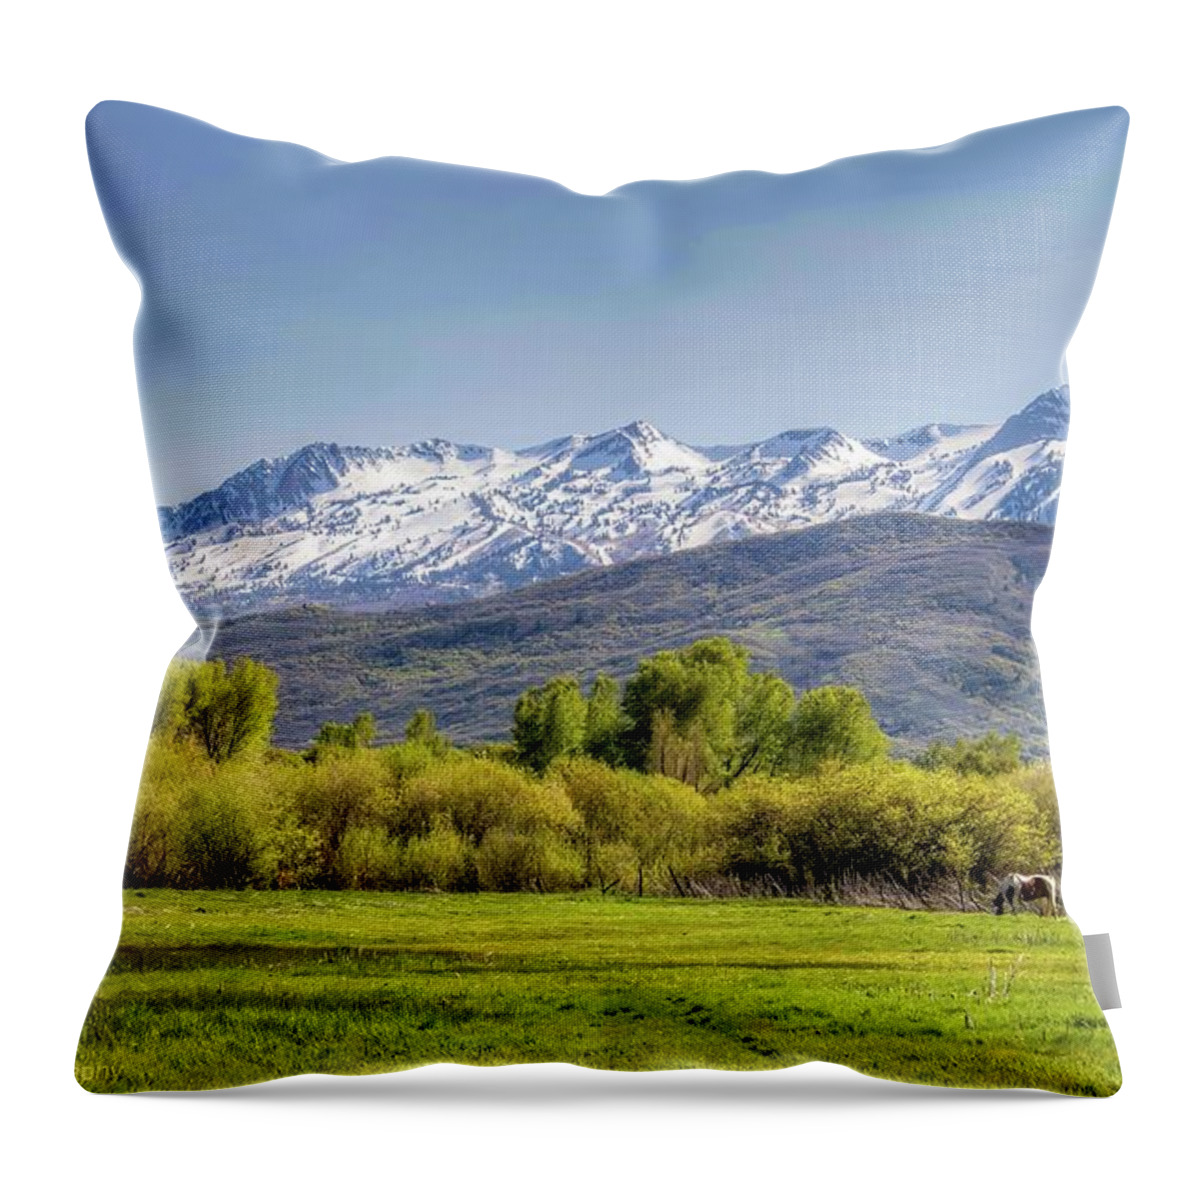 Utah Throw Pillow featuring the photograph Horse in the Valley by Pam Rendall